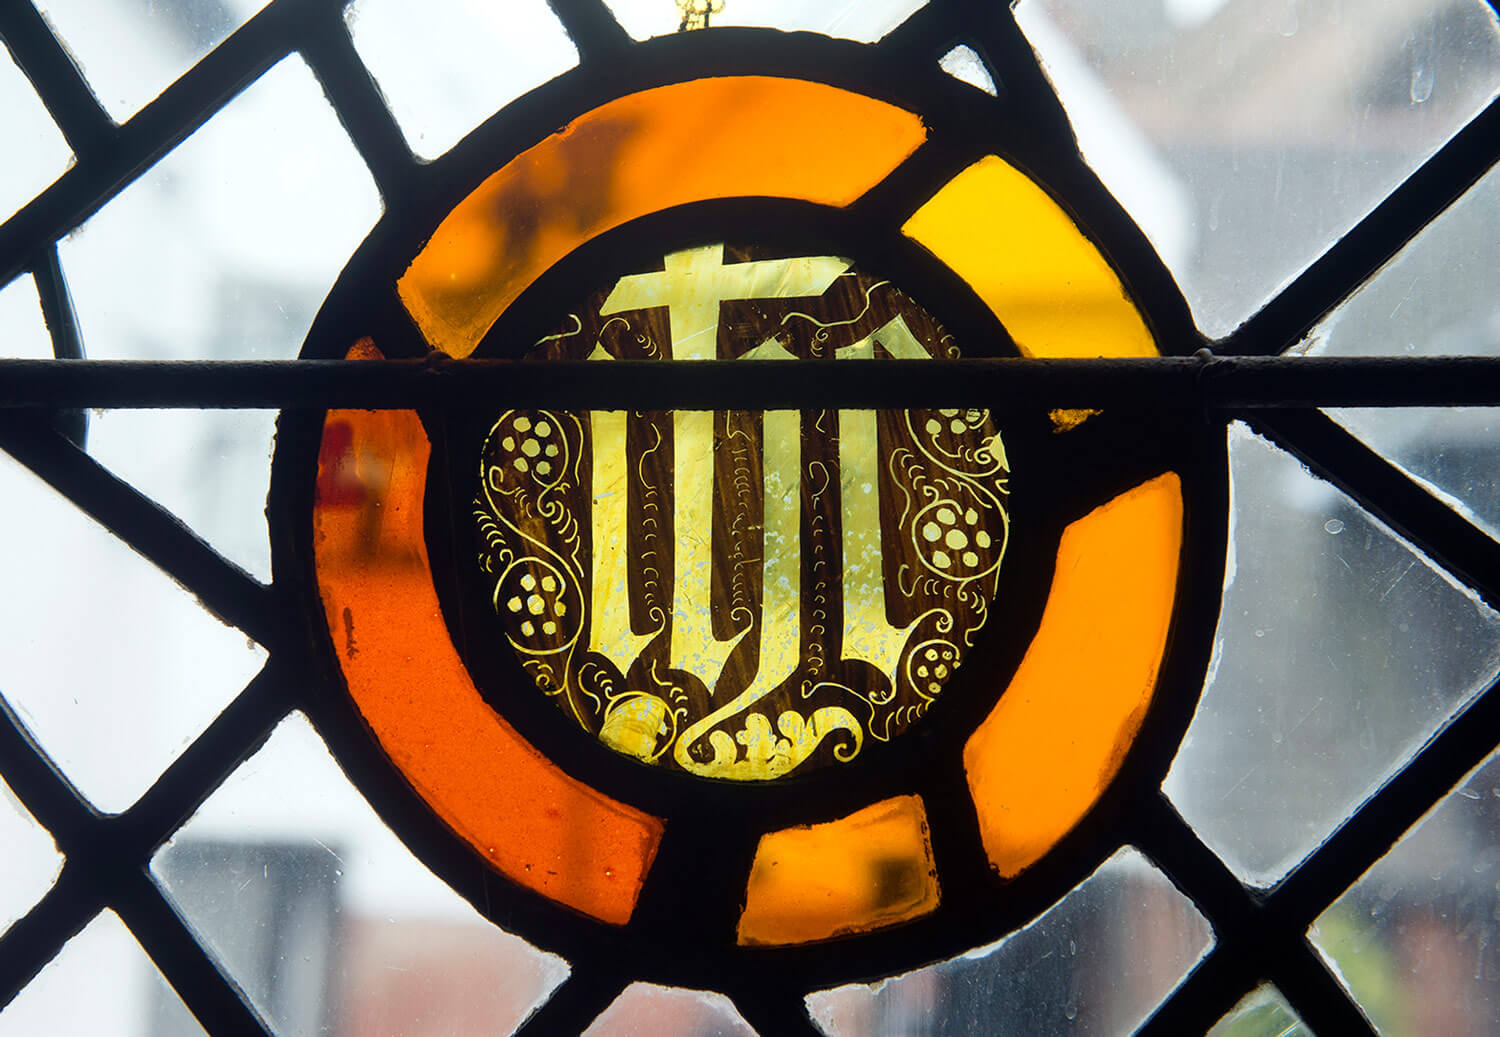 Painted glass on display at Leicester Guildhall -